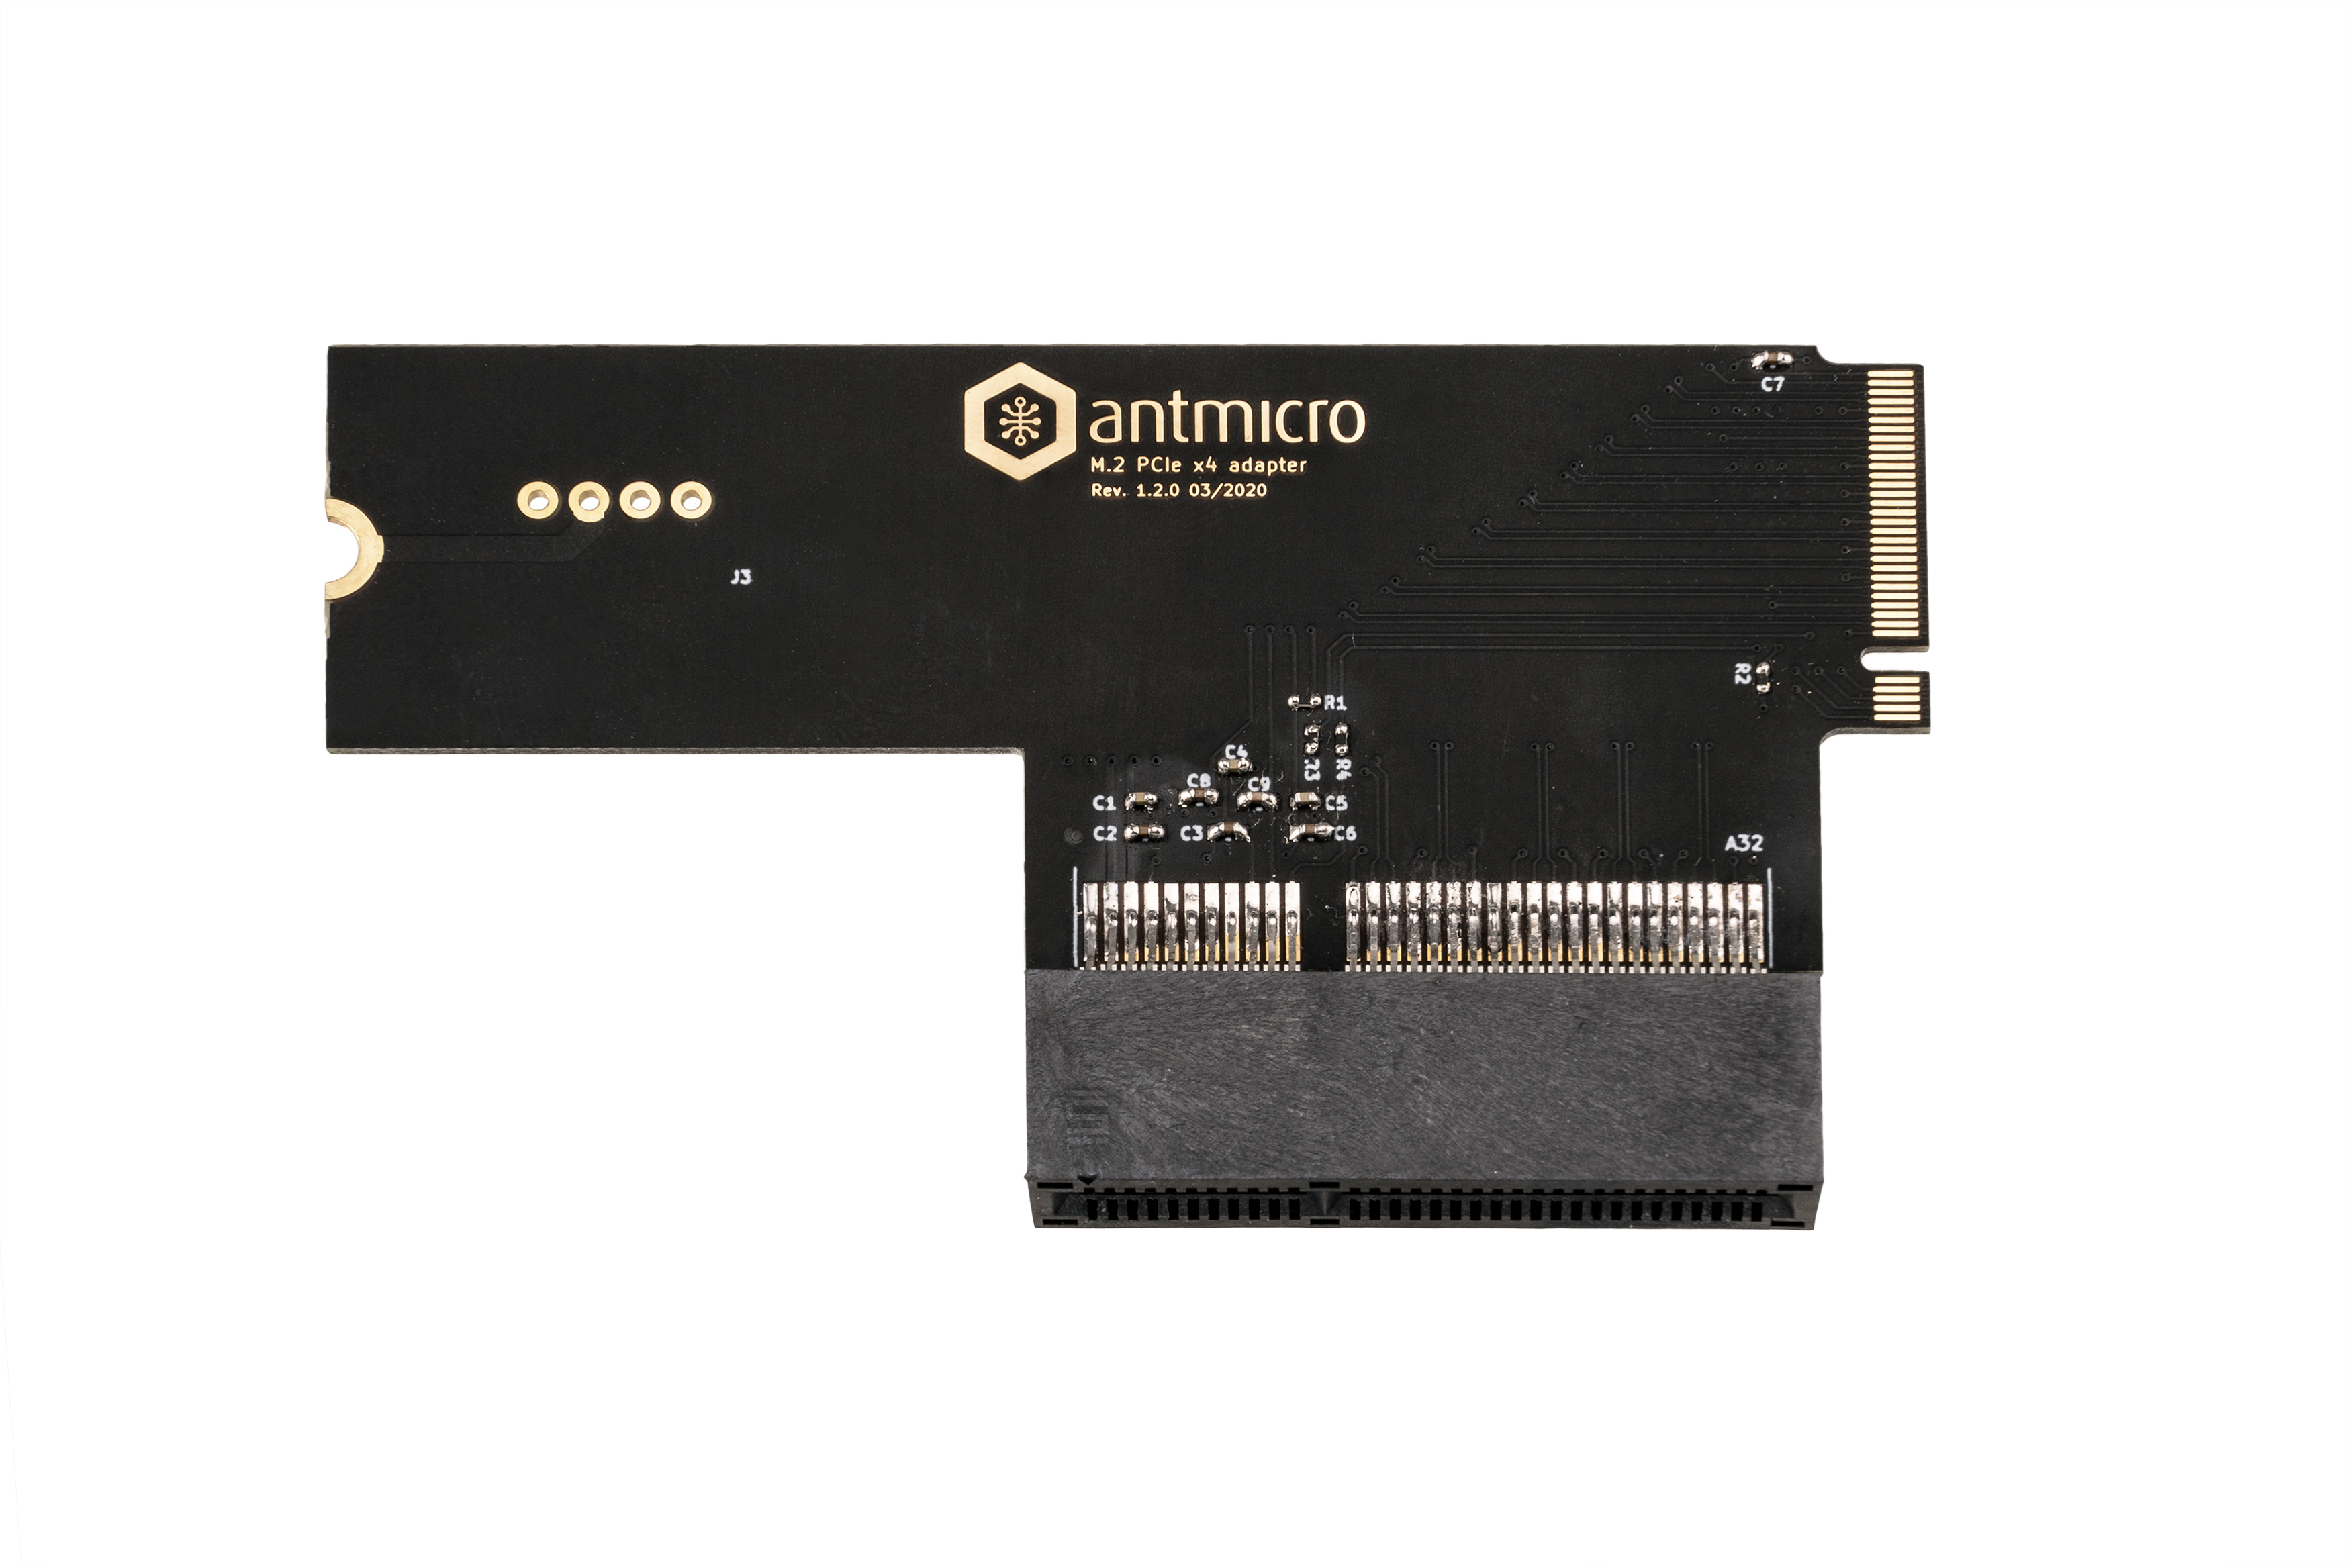 Antmicro’s M.2 PCIe adapter